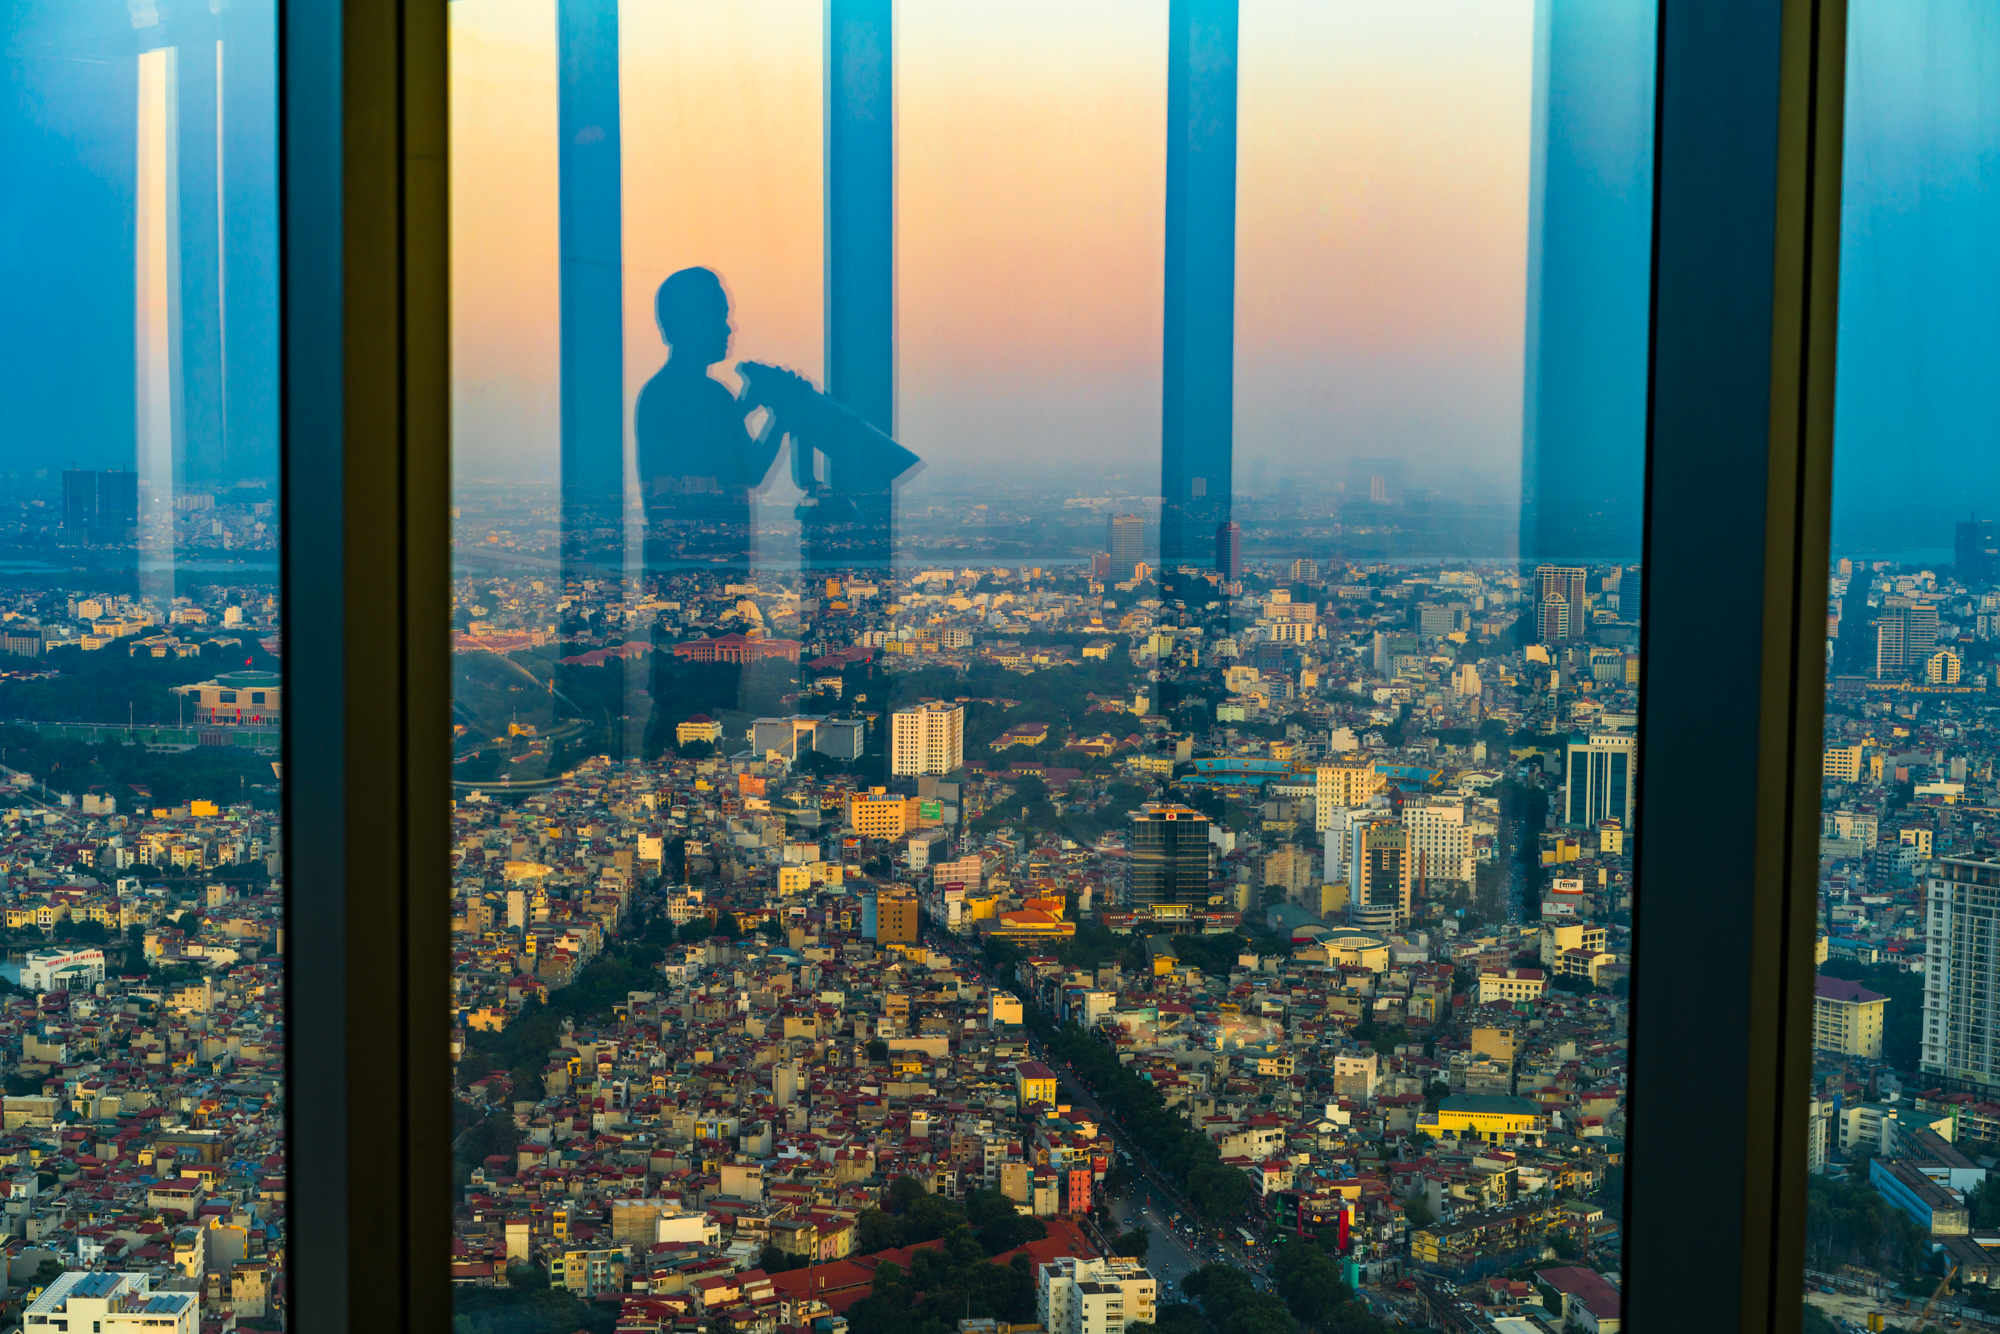 A view of Hanoi, Vietnam from the observation deck of a high rise tower.